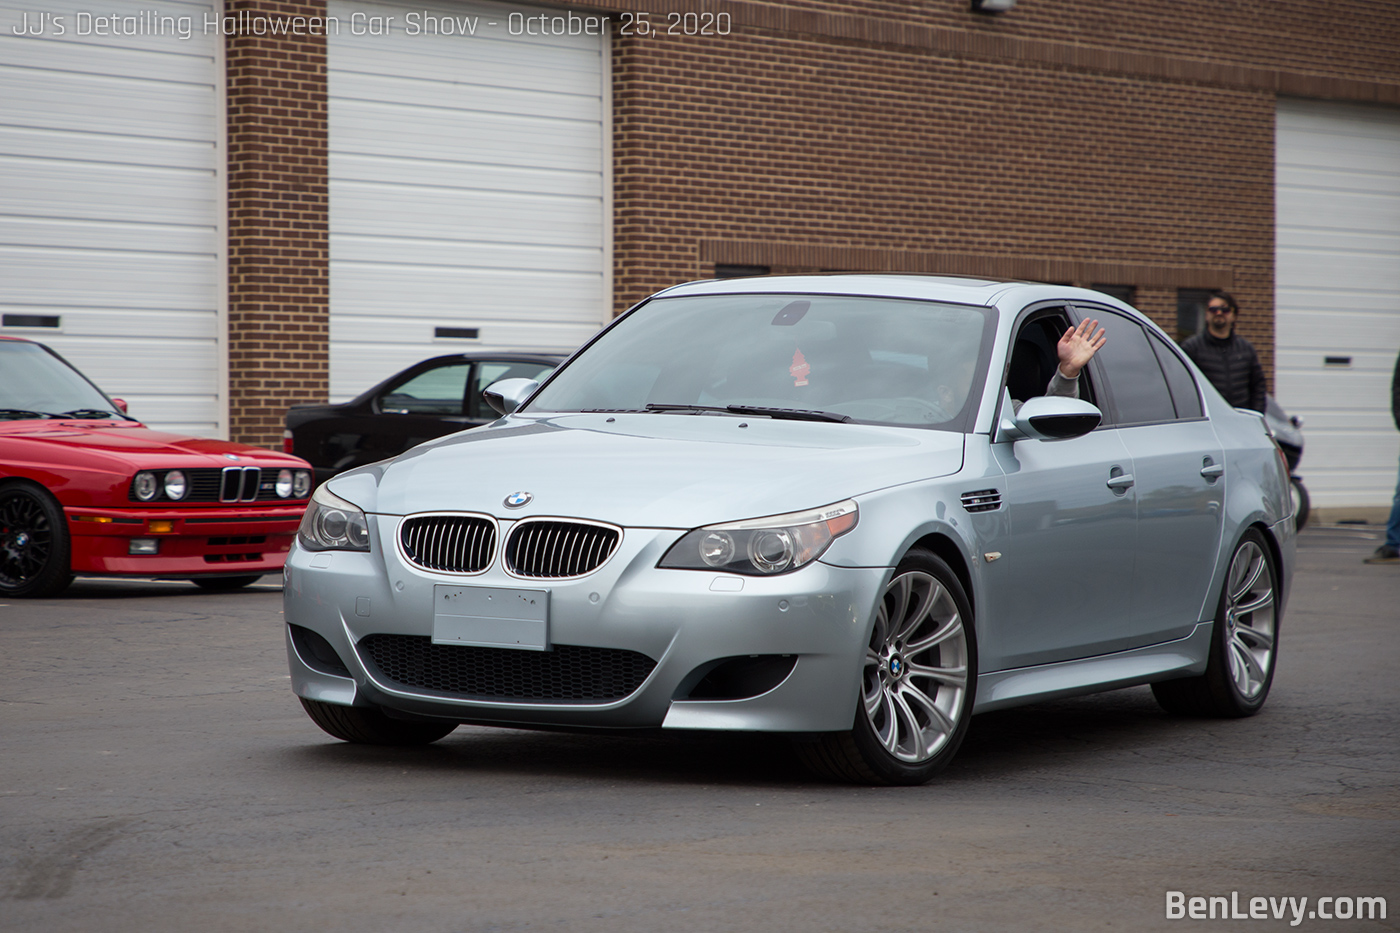 Waving from an E60 BMW M5